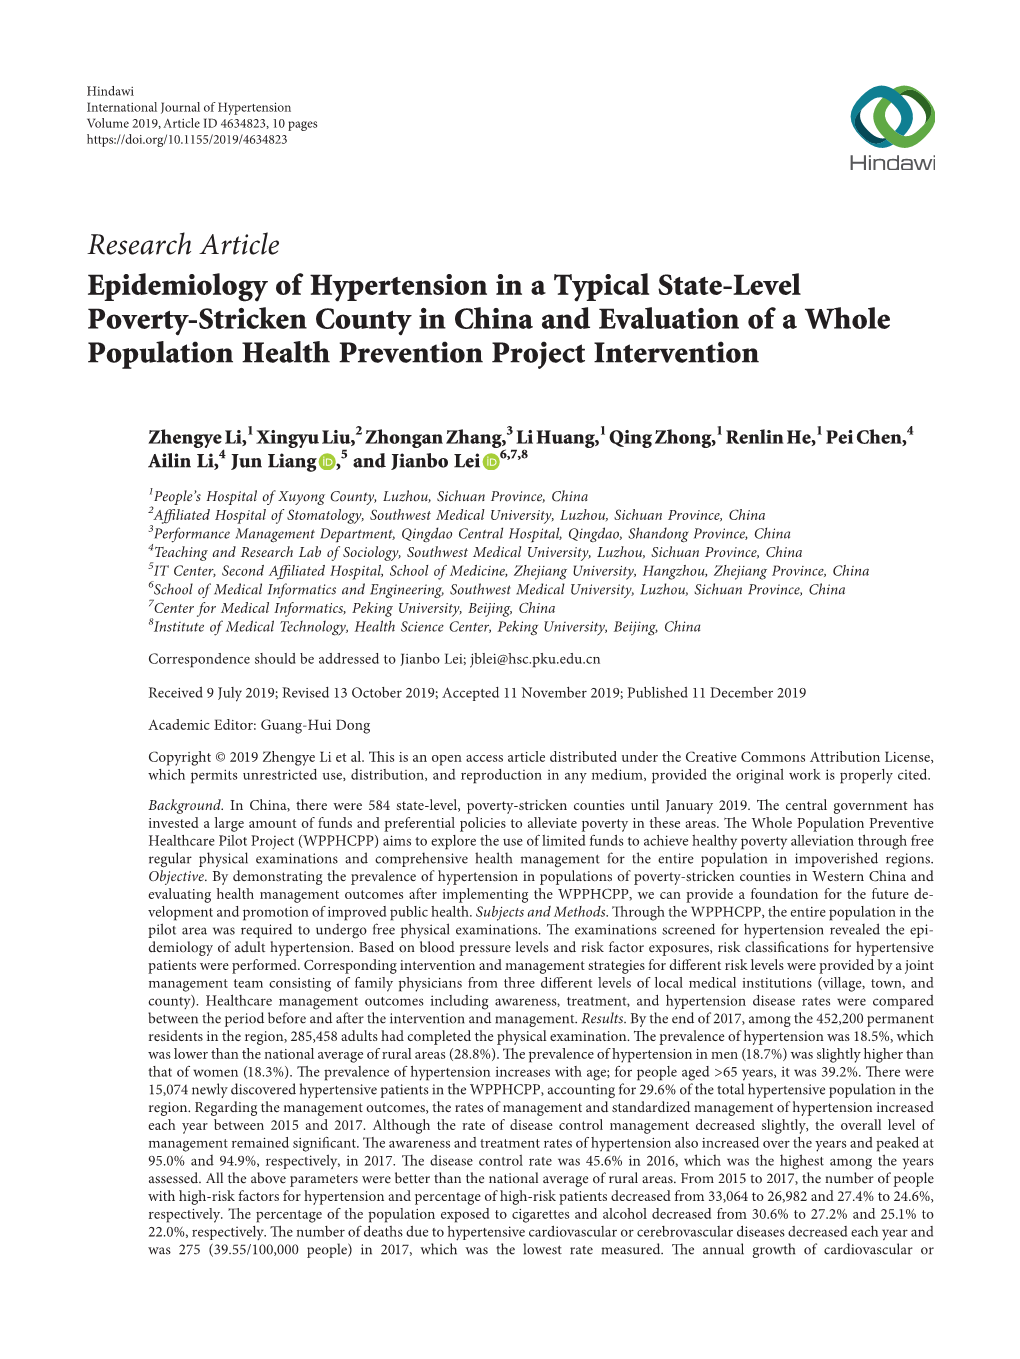 Epidemiology of Hypertension in a Typical State-Level Poverty-Stricken County in China and Evaluation of a Whole Population Health Prevention Project Intervention